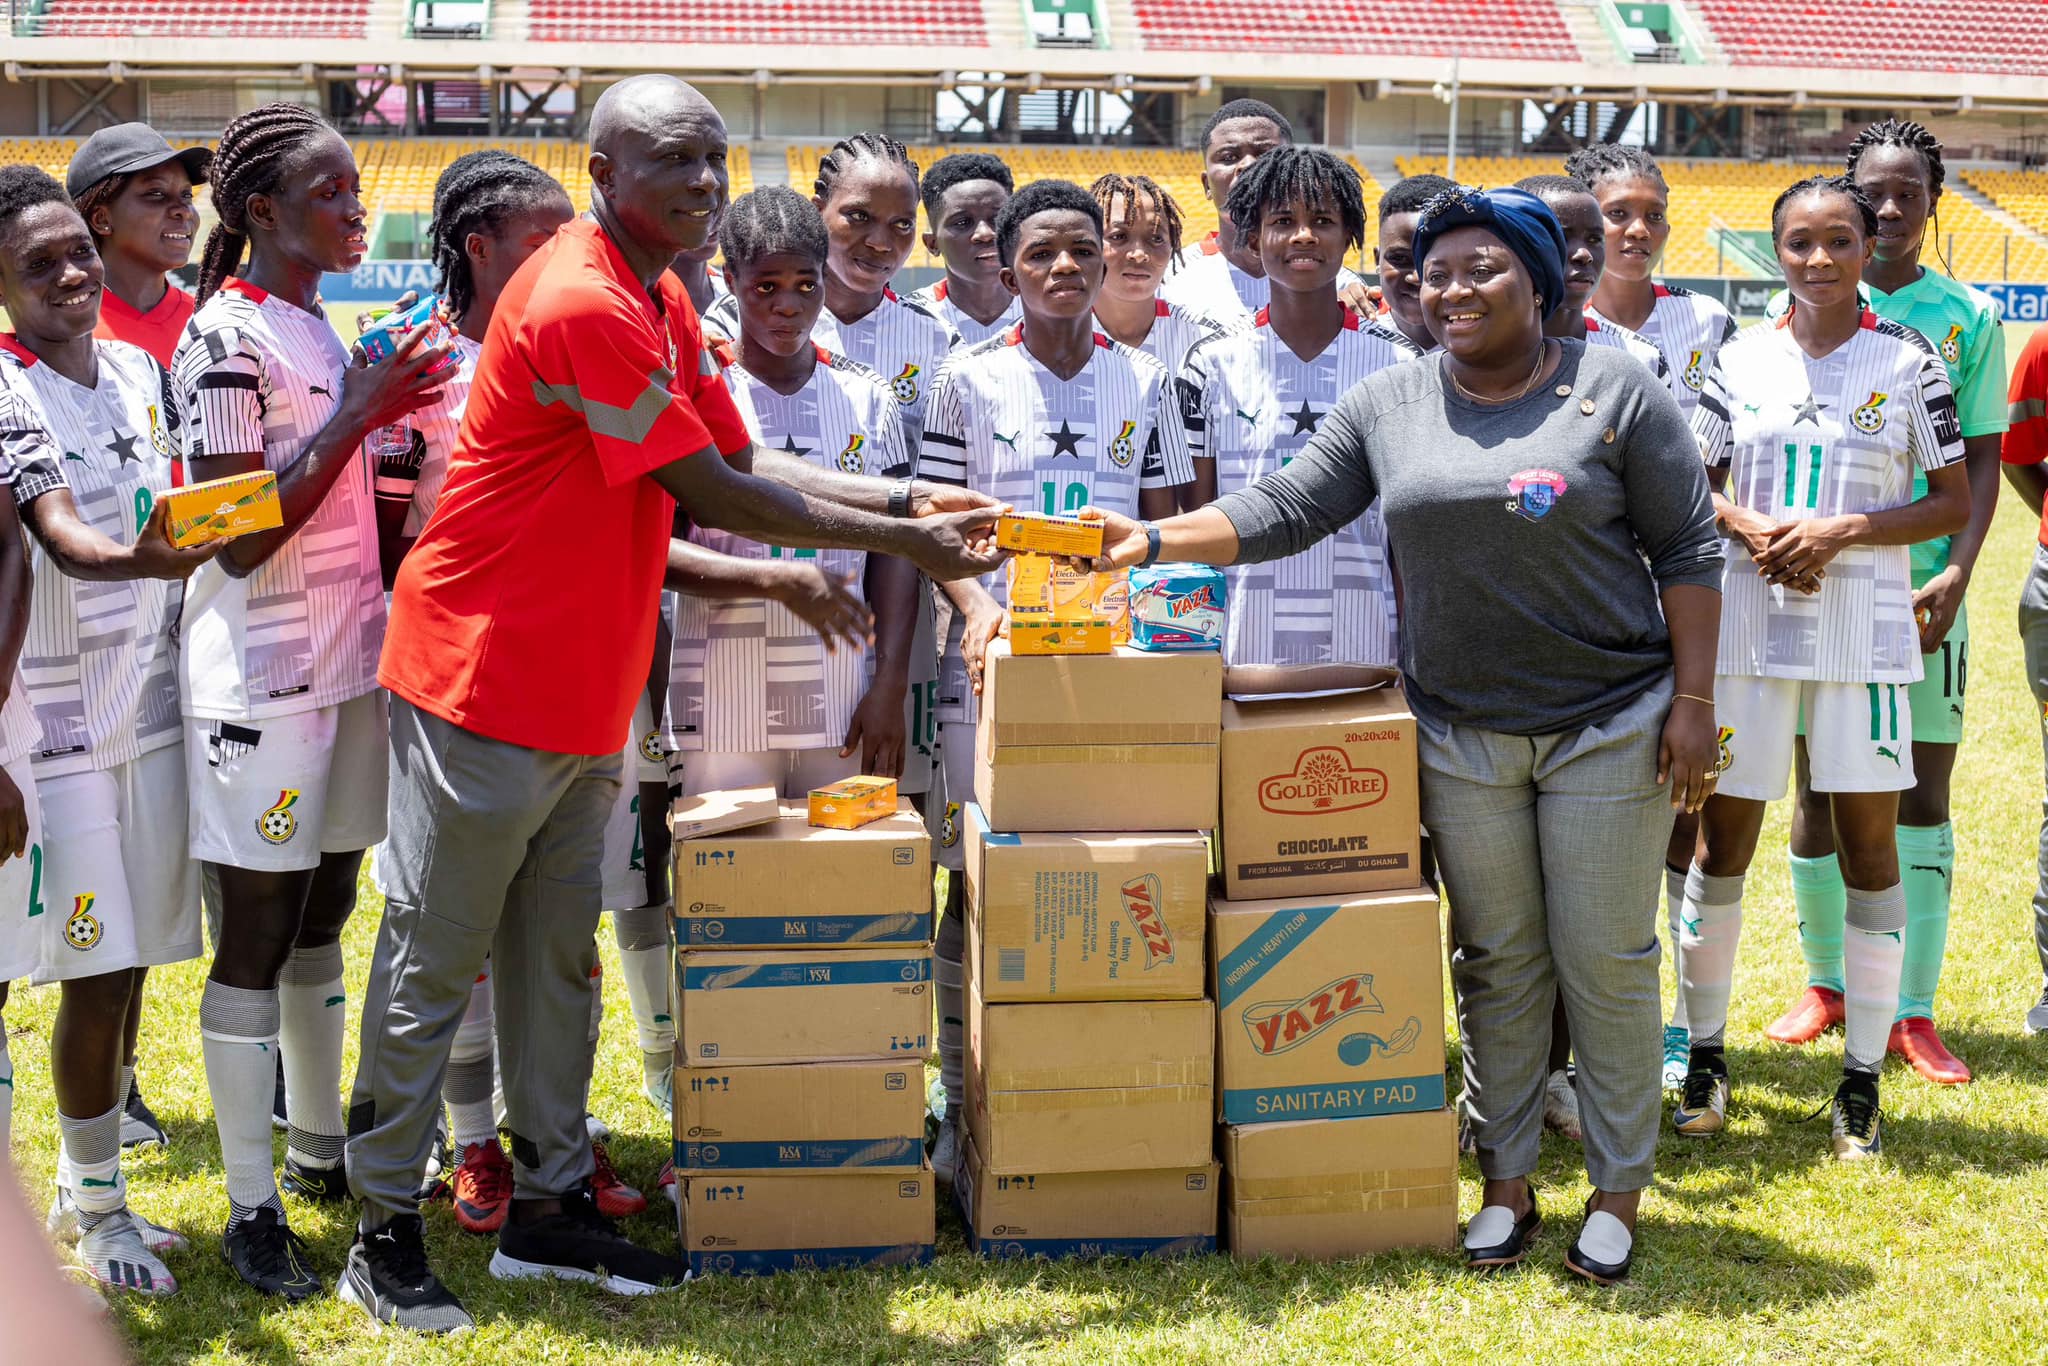 Berry Ladies CEO Gifty Afia Oware donates cash and items to Black Princesses